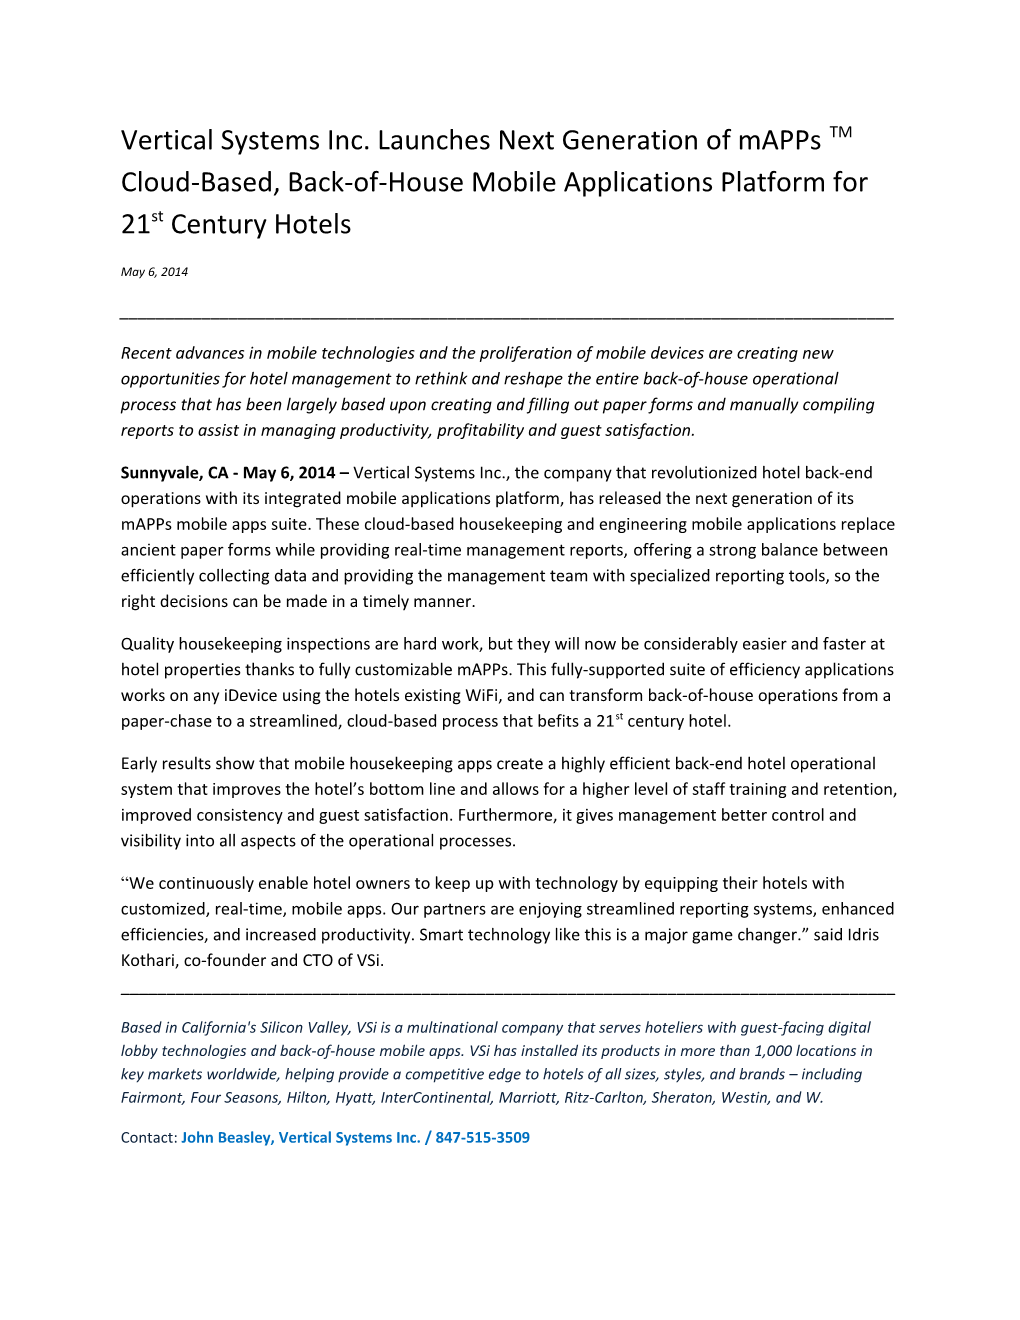 Vertical Systems Inc. Launches Next Generation of Mapps TM Cloud-Based, Back-Of-House Mobile